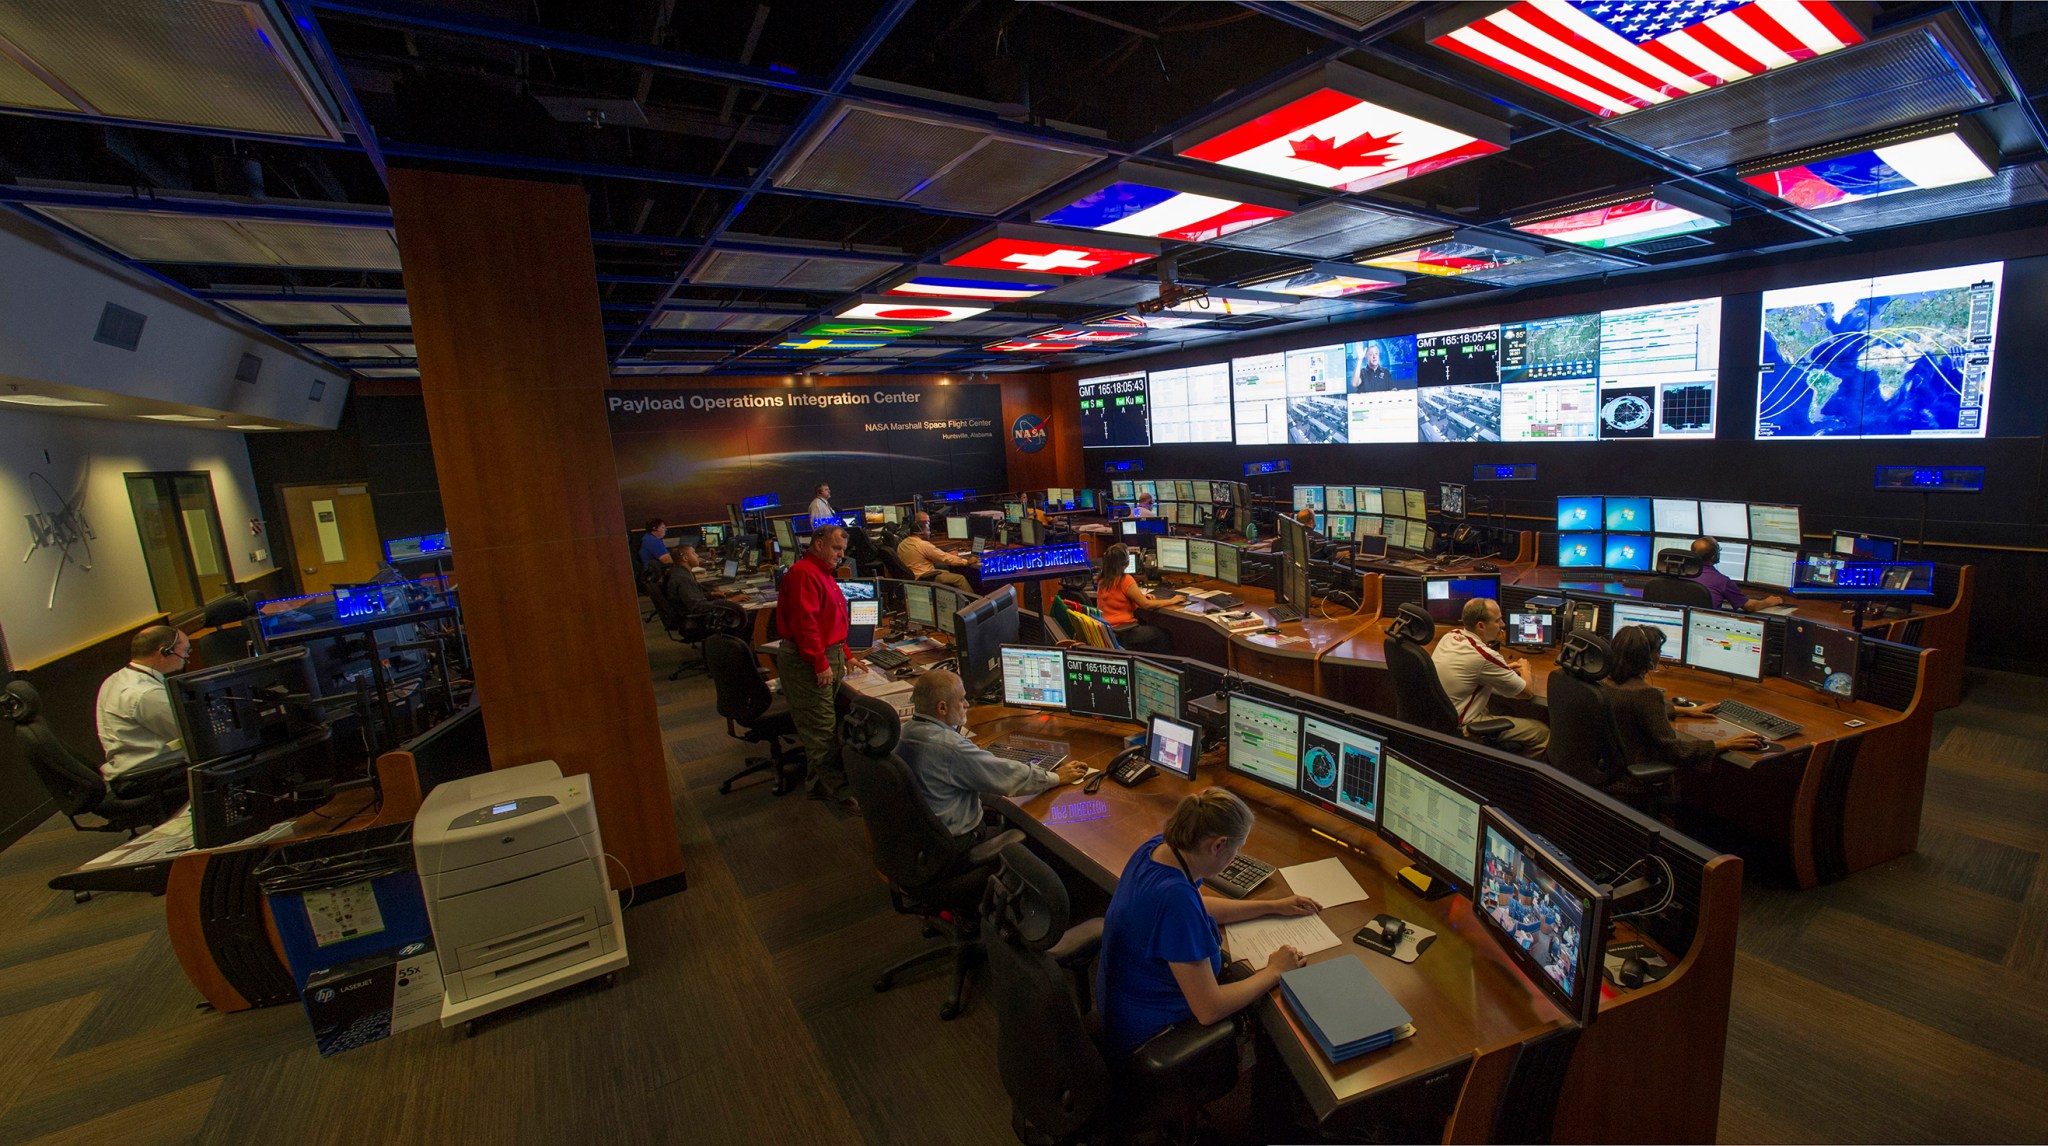 Payload Operation Integration Center 